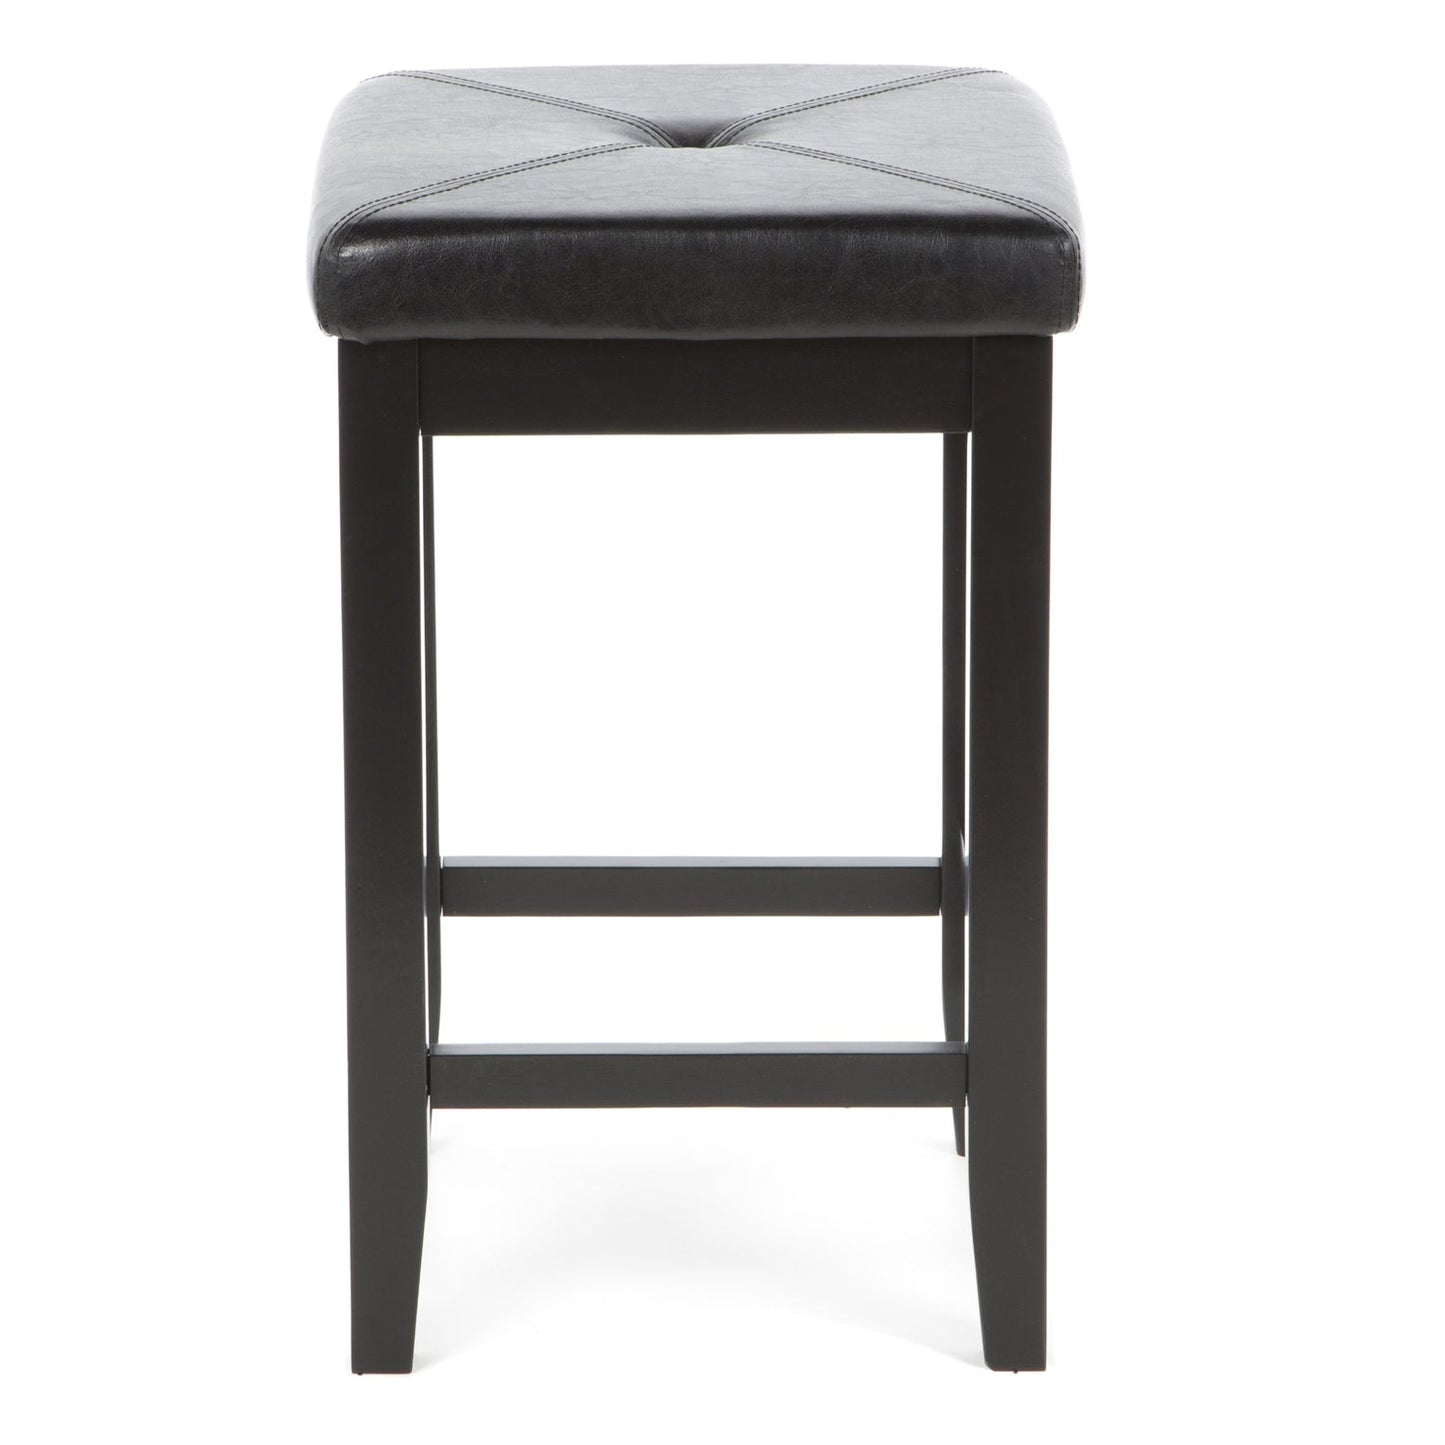 Dining > Barstools - Set Of 2 - Black 24-inch Backless Barstools With Faux Leather Seat